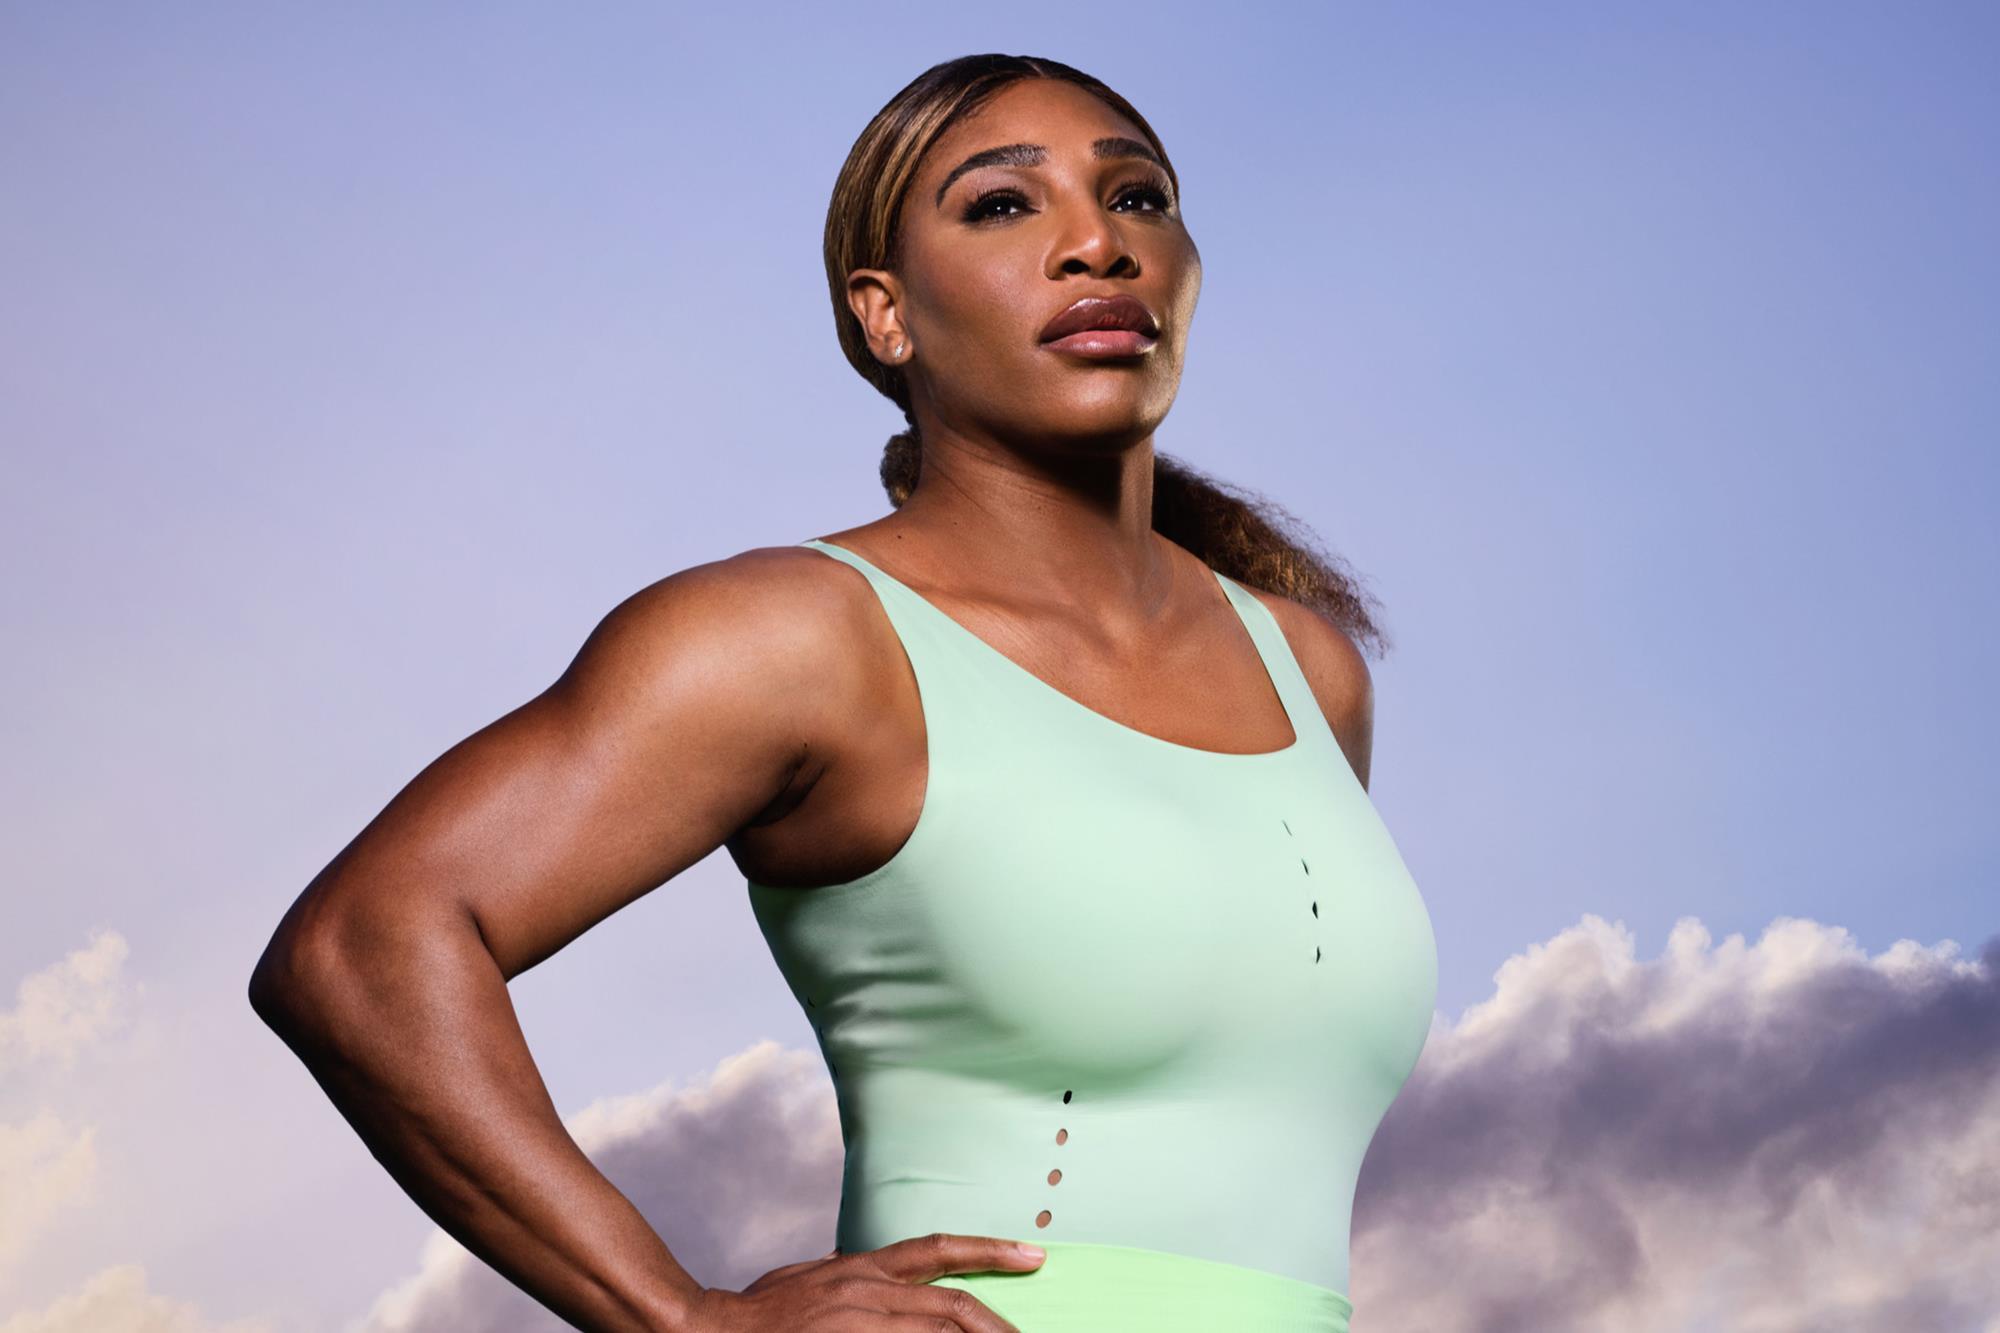 Serenawilliams is the first athlete to win the Fashion Icon Award at